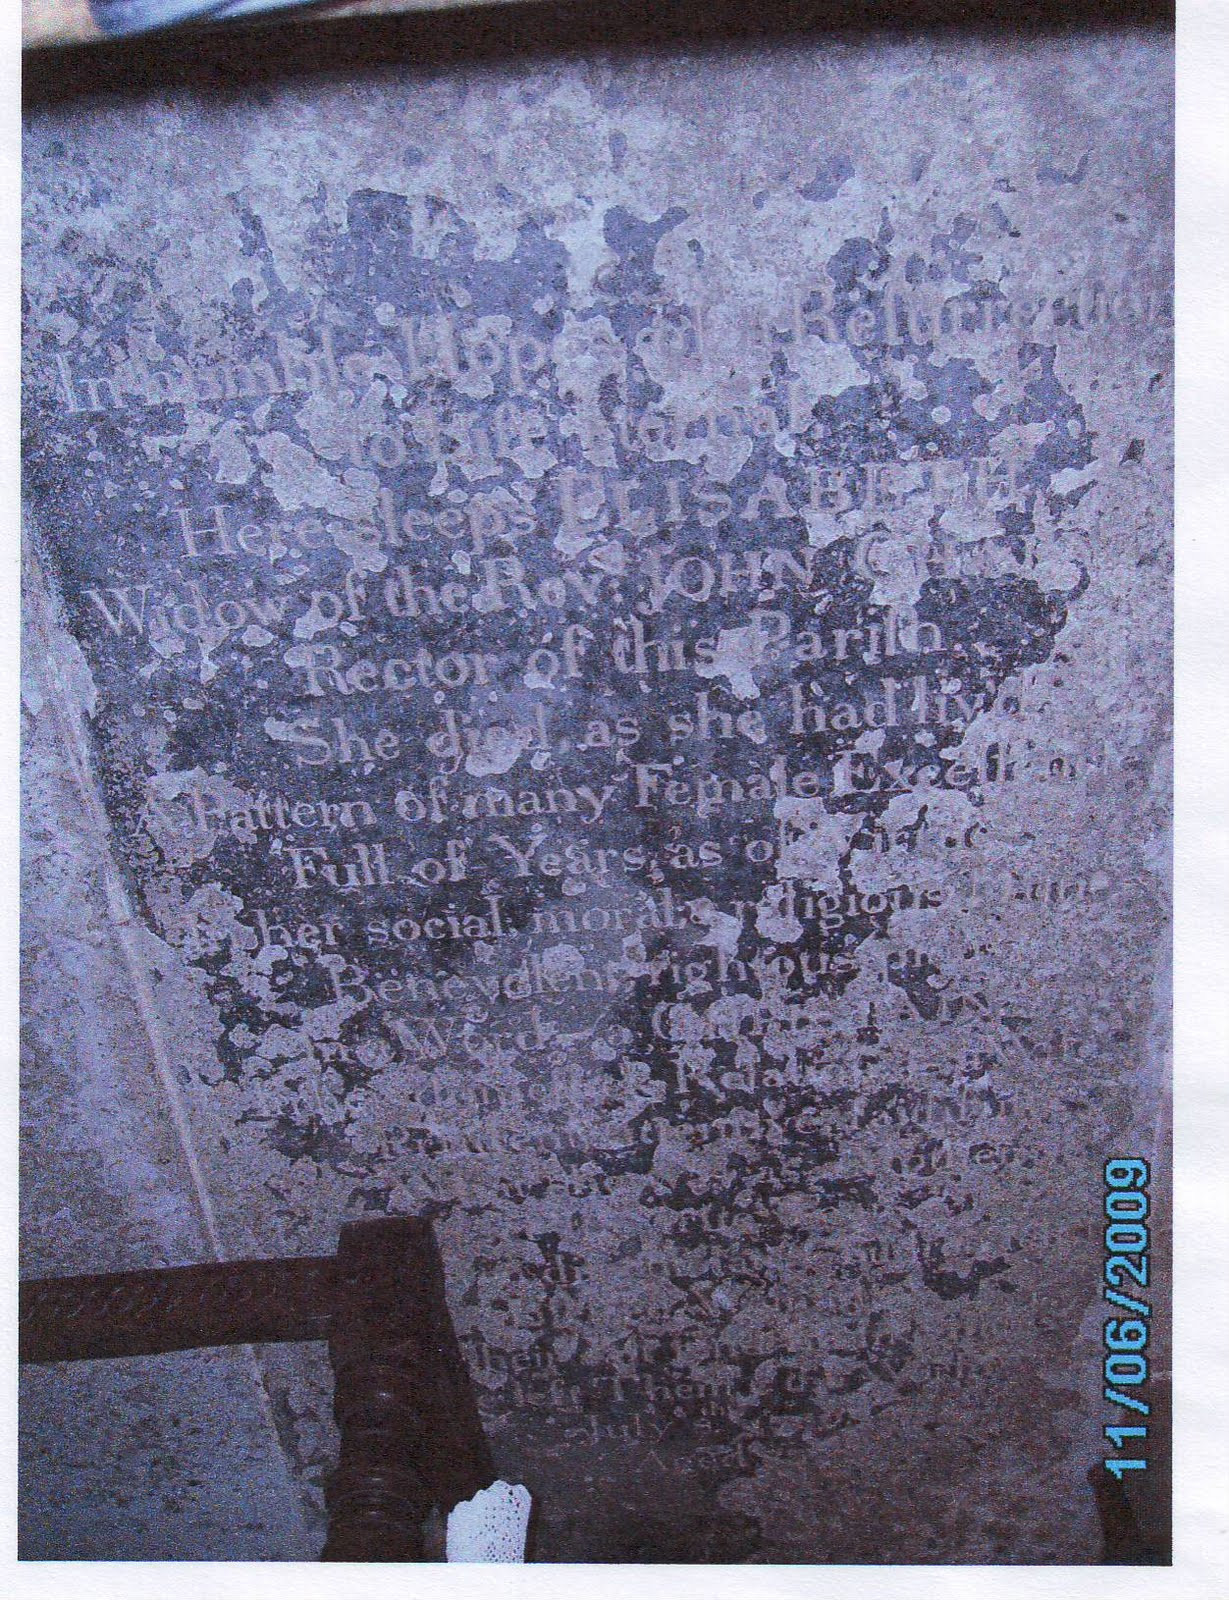 14 Popular Granite Cemetery Vases 2024 free download granite cemetery vases of purse caundle history appendices may 2010 in a memorial slab was placed on the floor of the sanctuary in front of the altar